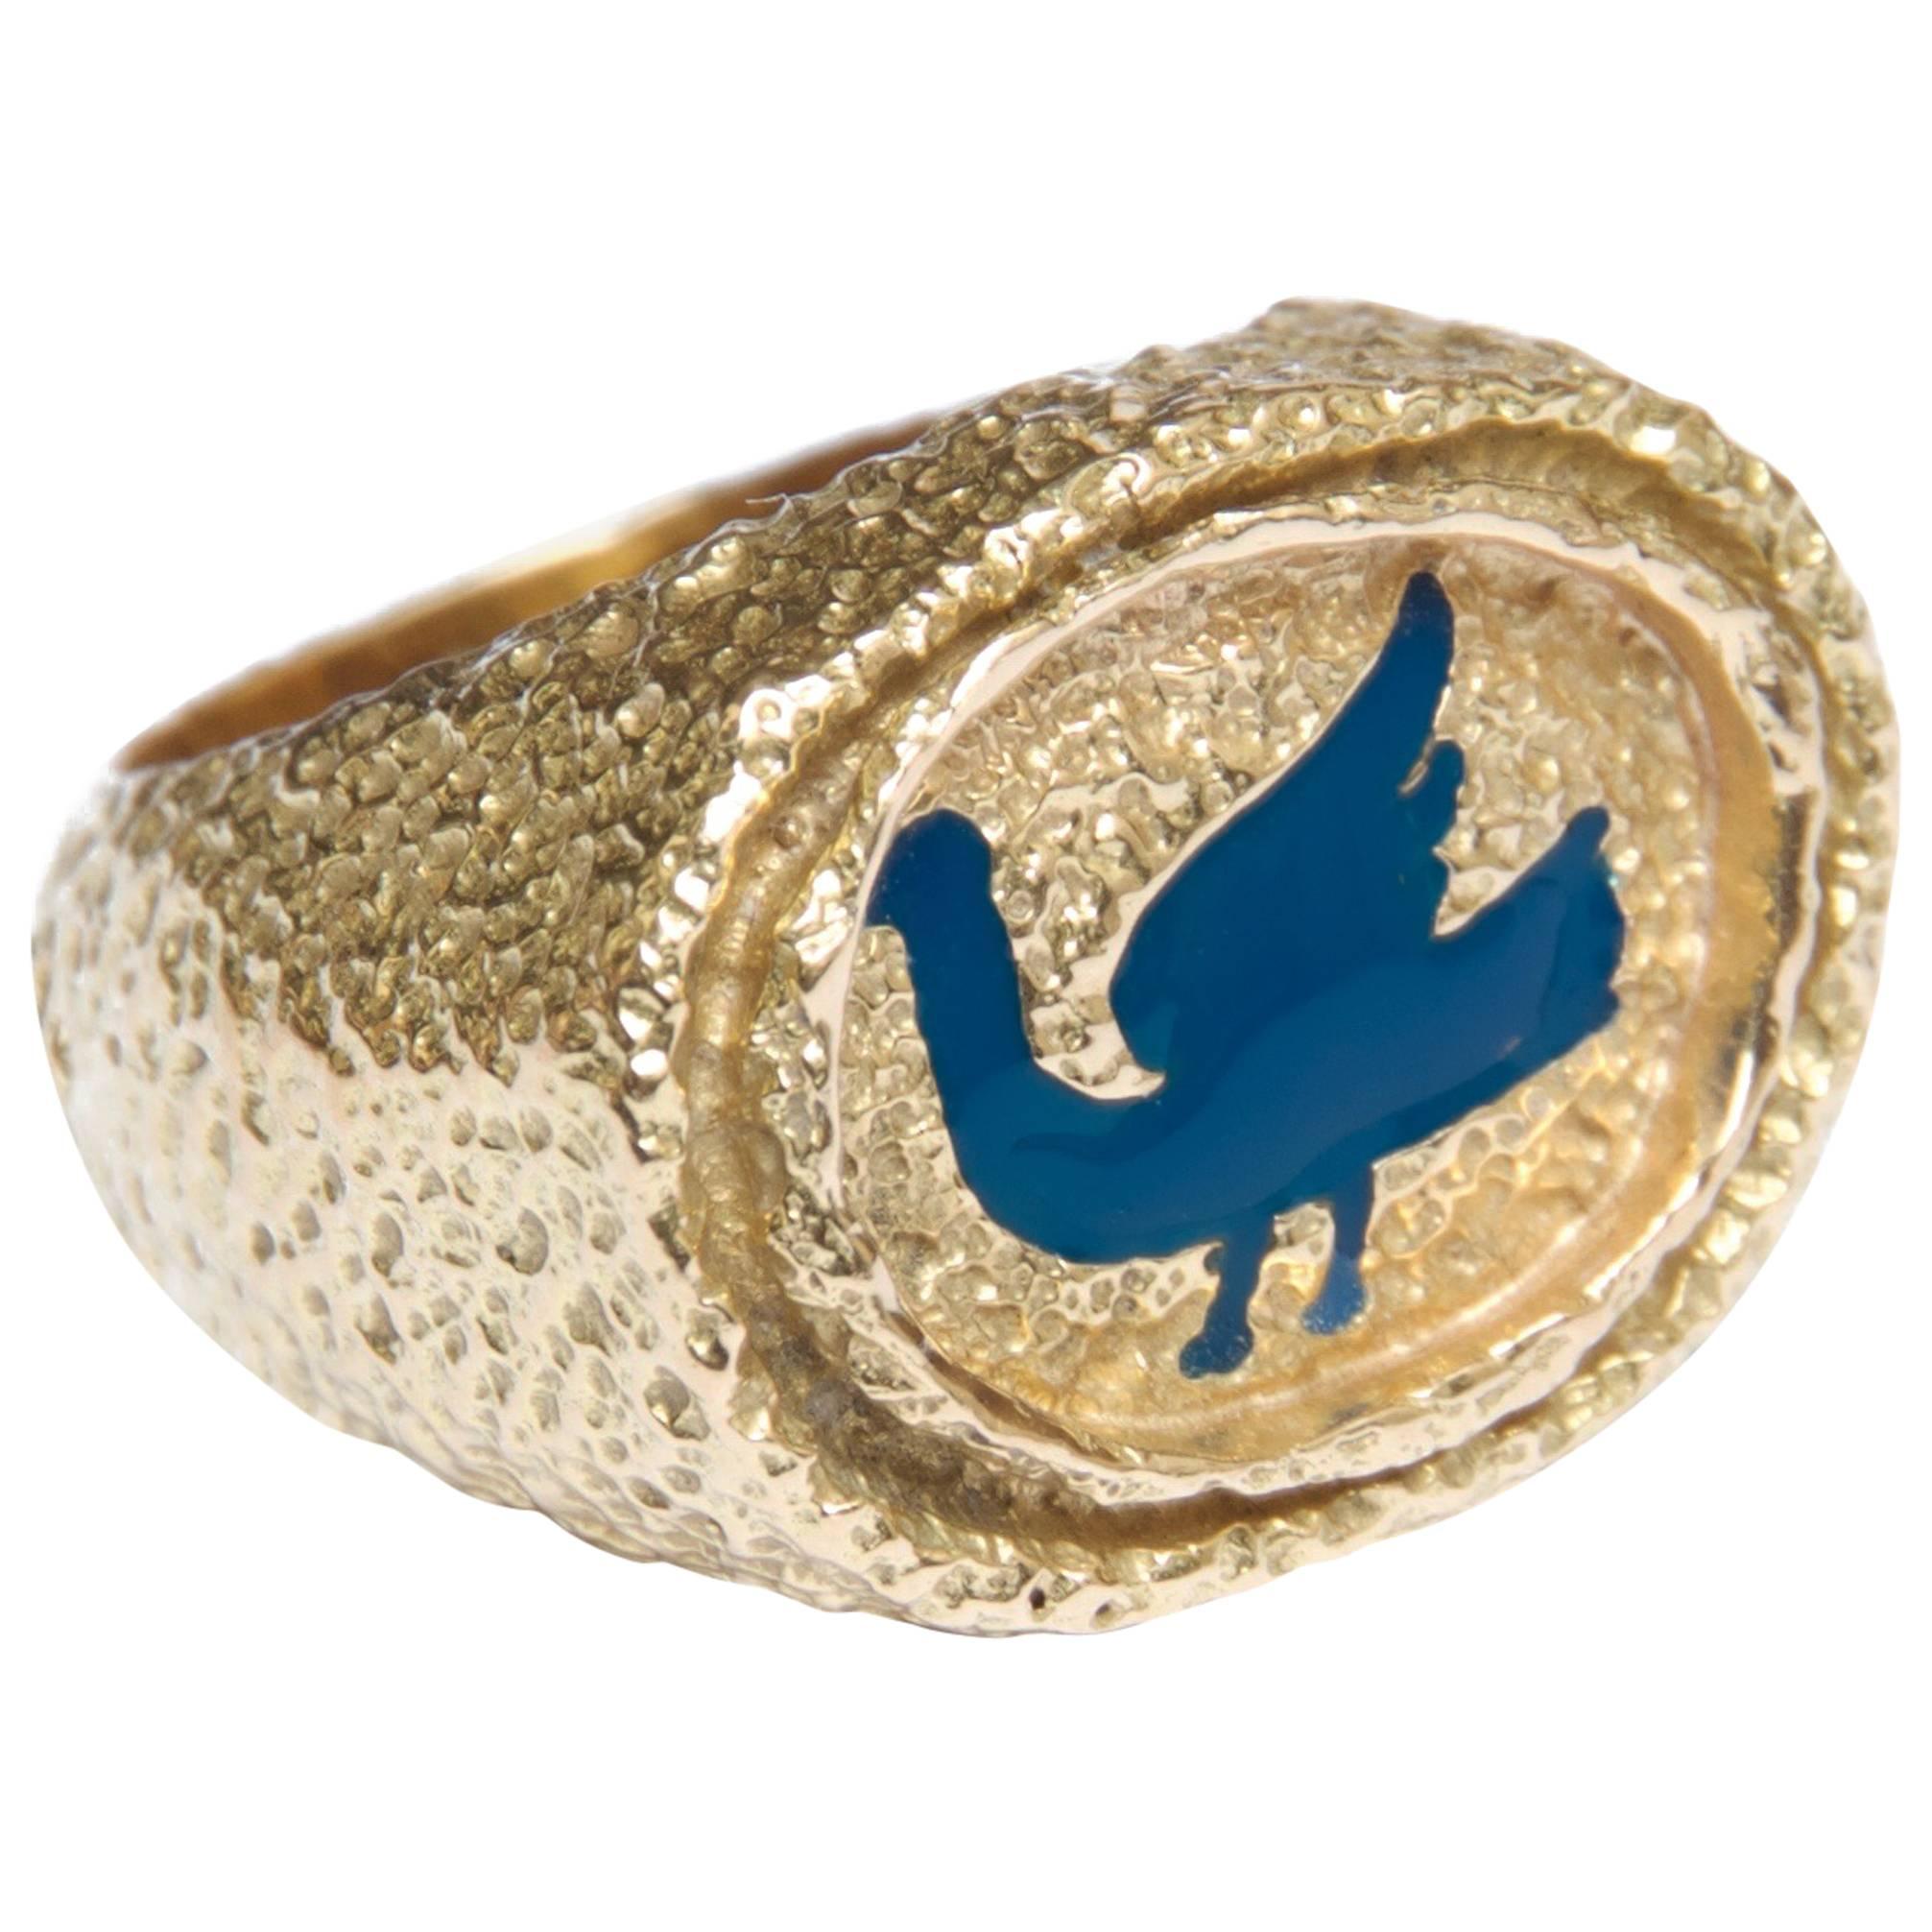 Beautifull 18K Gold & Blue enamel Ring by Georges Braque (1882-1963), inventor of cubism. 
The piece is called "Procris". 
It is Signed "Bijoux de Braque" and numbered 7/8
Size 55 (7 1/8) 

The bird theme is a major Braque